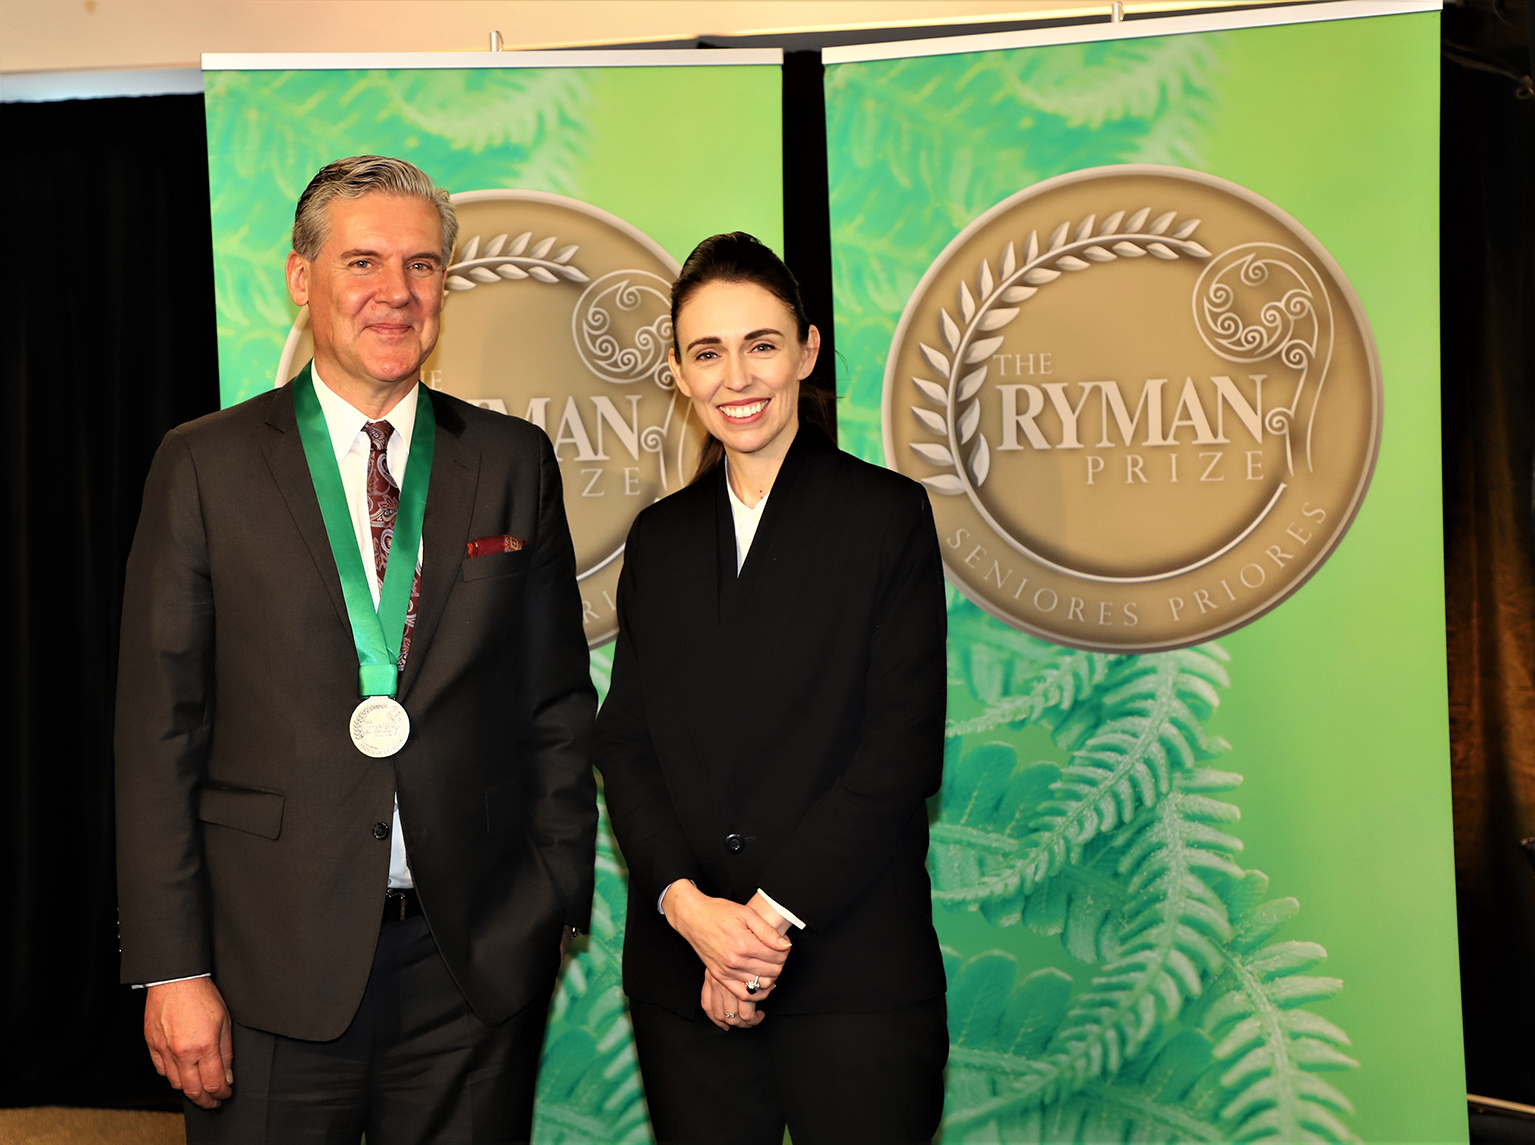 Dr. Michael Fehlings with New Zealand Prime Minister Jacinda Ardern, receiving the Ryman Prize.